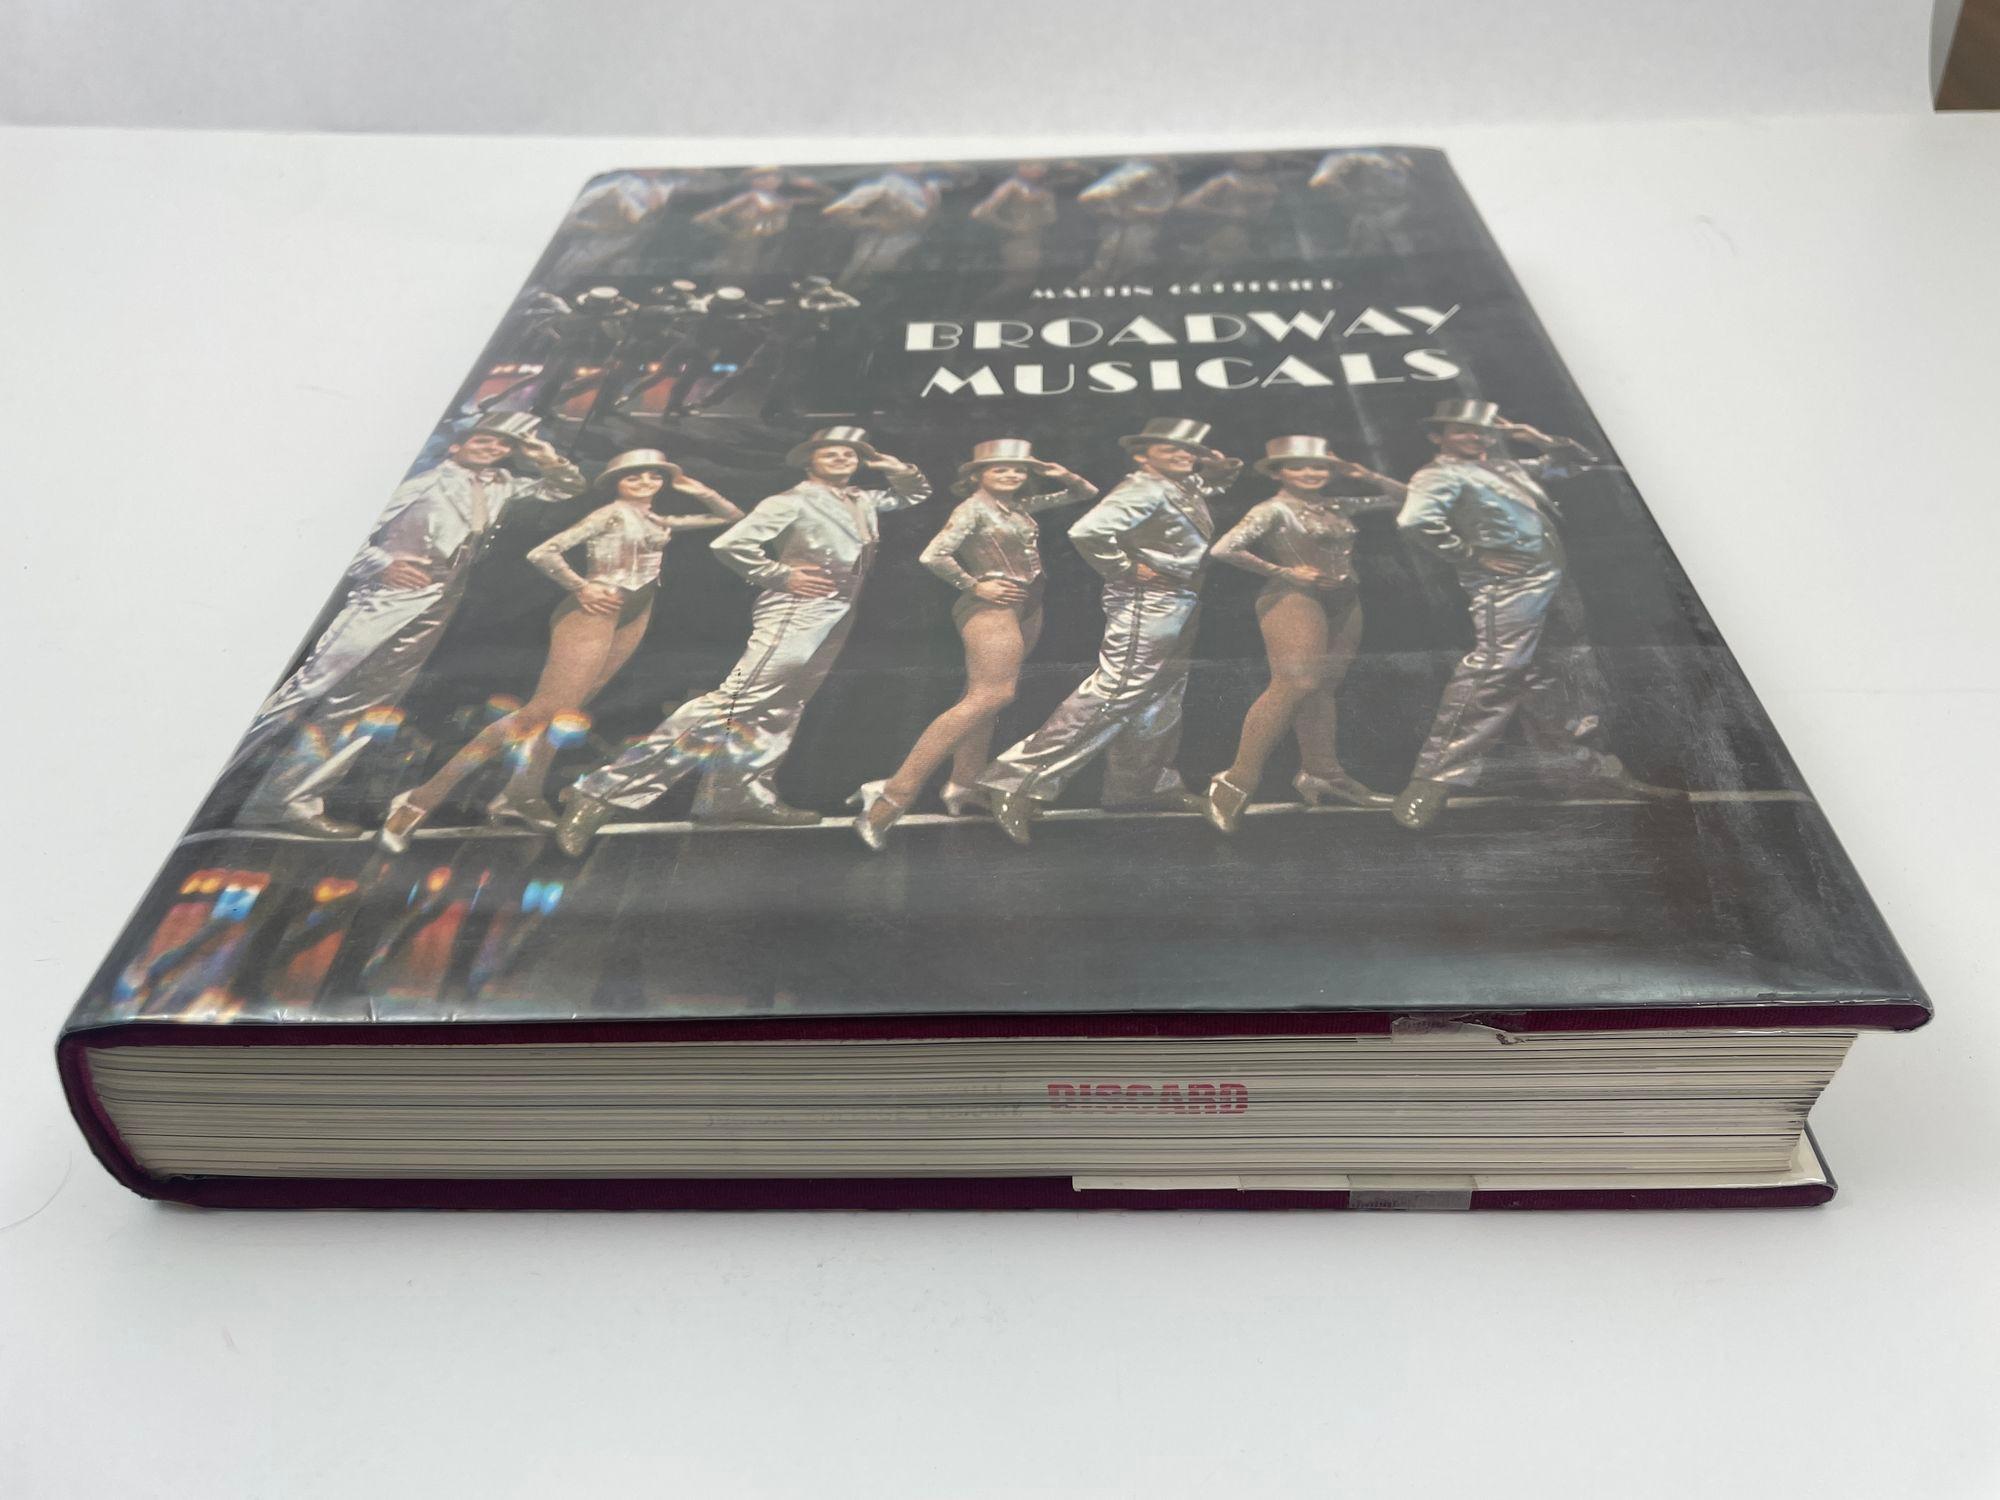 Broadway Musical Martin Gottfried 1980 hardcover book.Large heavy book.
A colorful tribute to the great Broadway shows of our time.
Profusely illustrated in color. New York: Harry N. Abrams, Inc.
Title Broadway Musicals Author Gottfried,